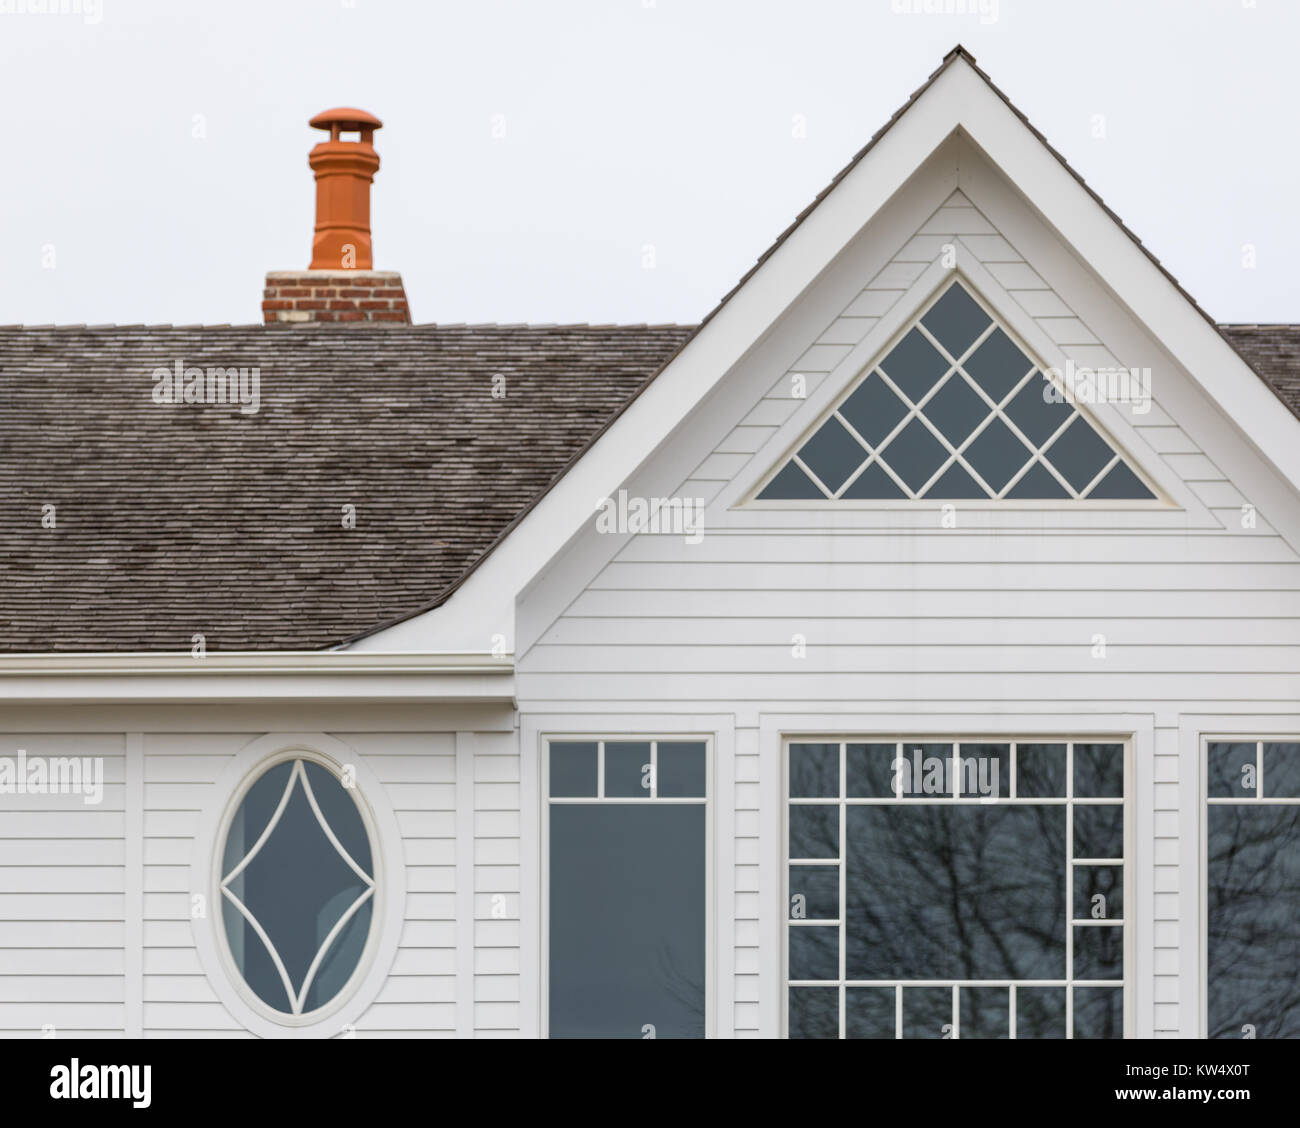 detail image of a house with different types of windows Stock Photo